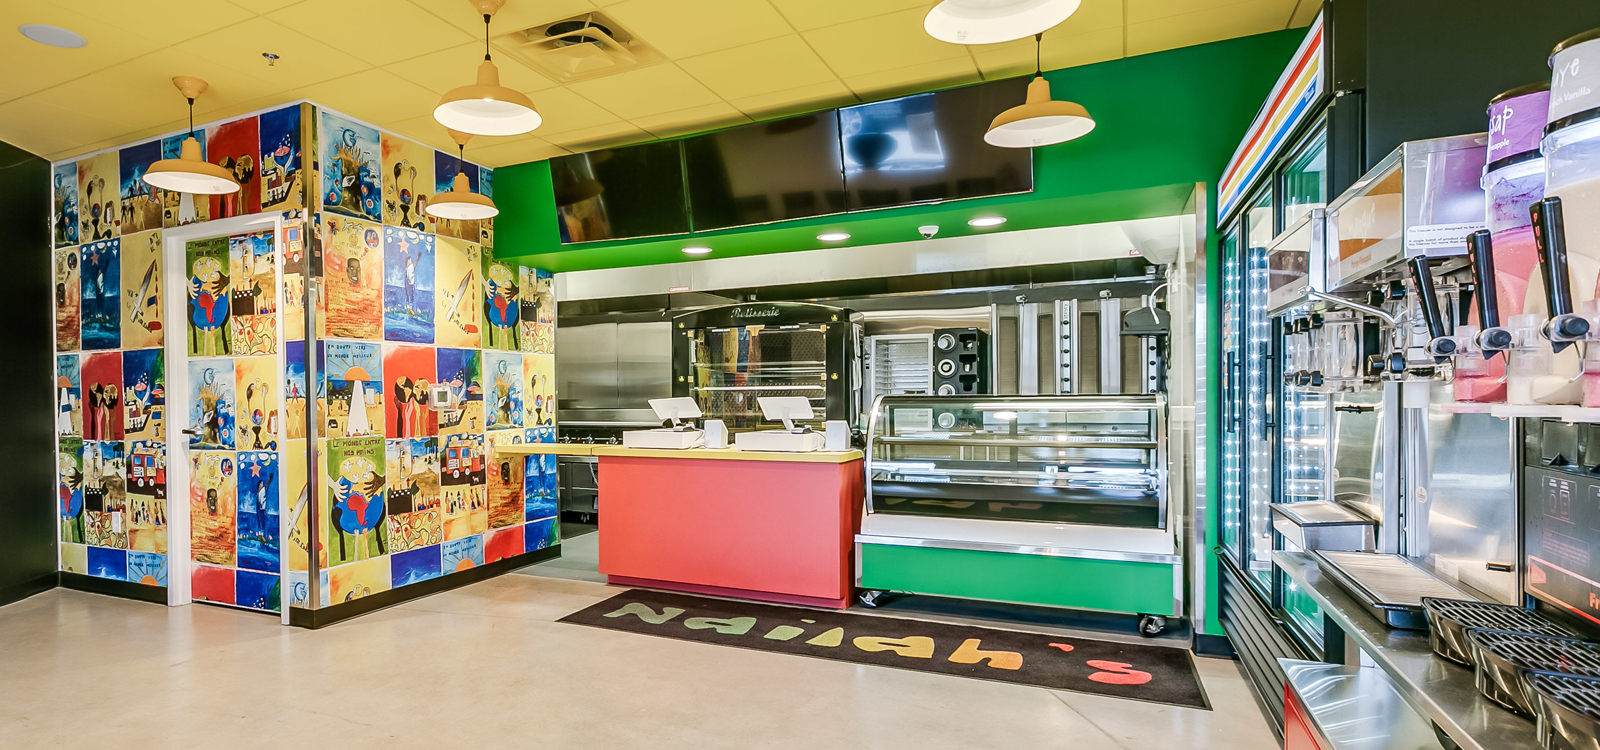 Nailah's Kitchen, Baltimore MD, commercial renovation by UrbanBuilt